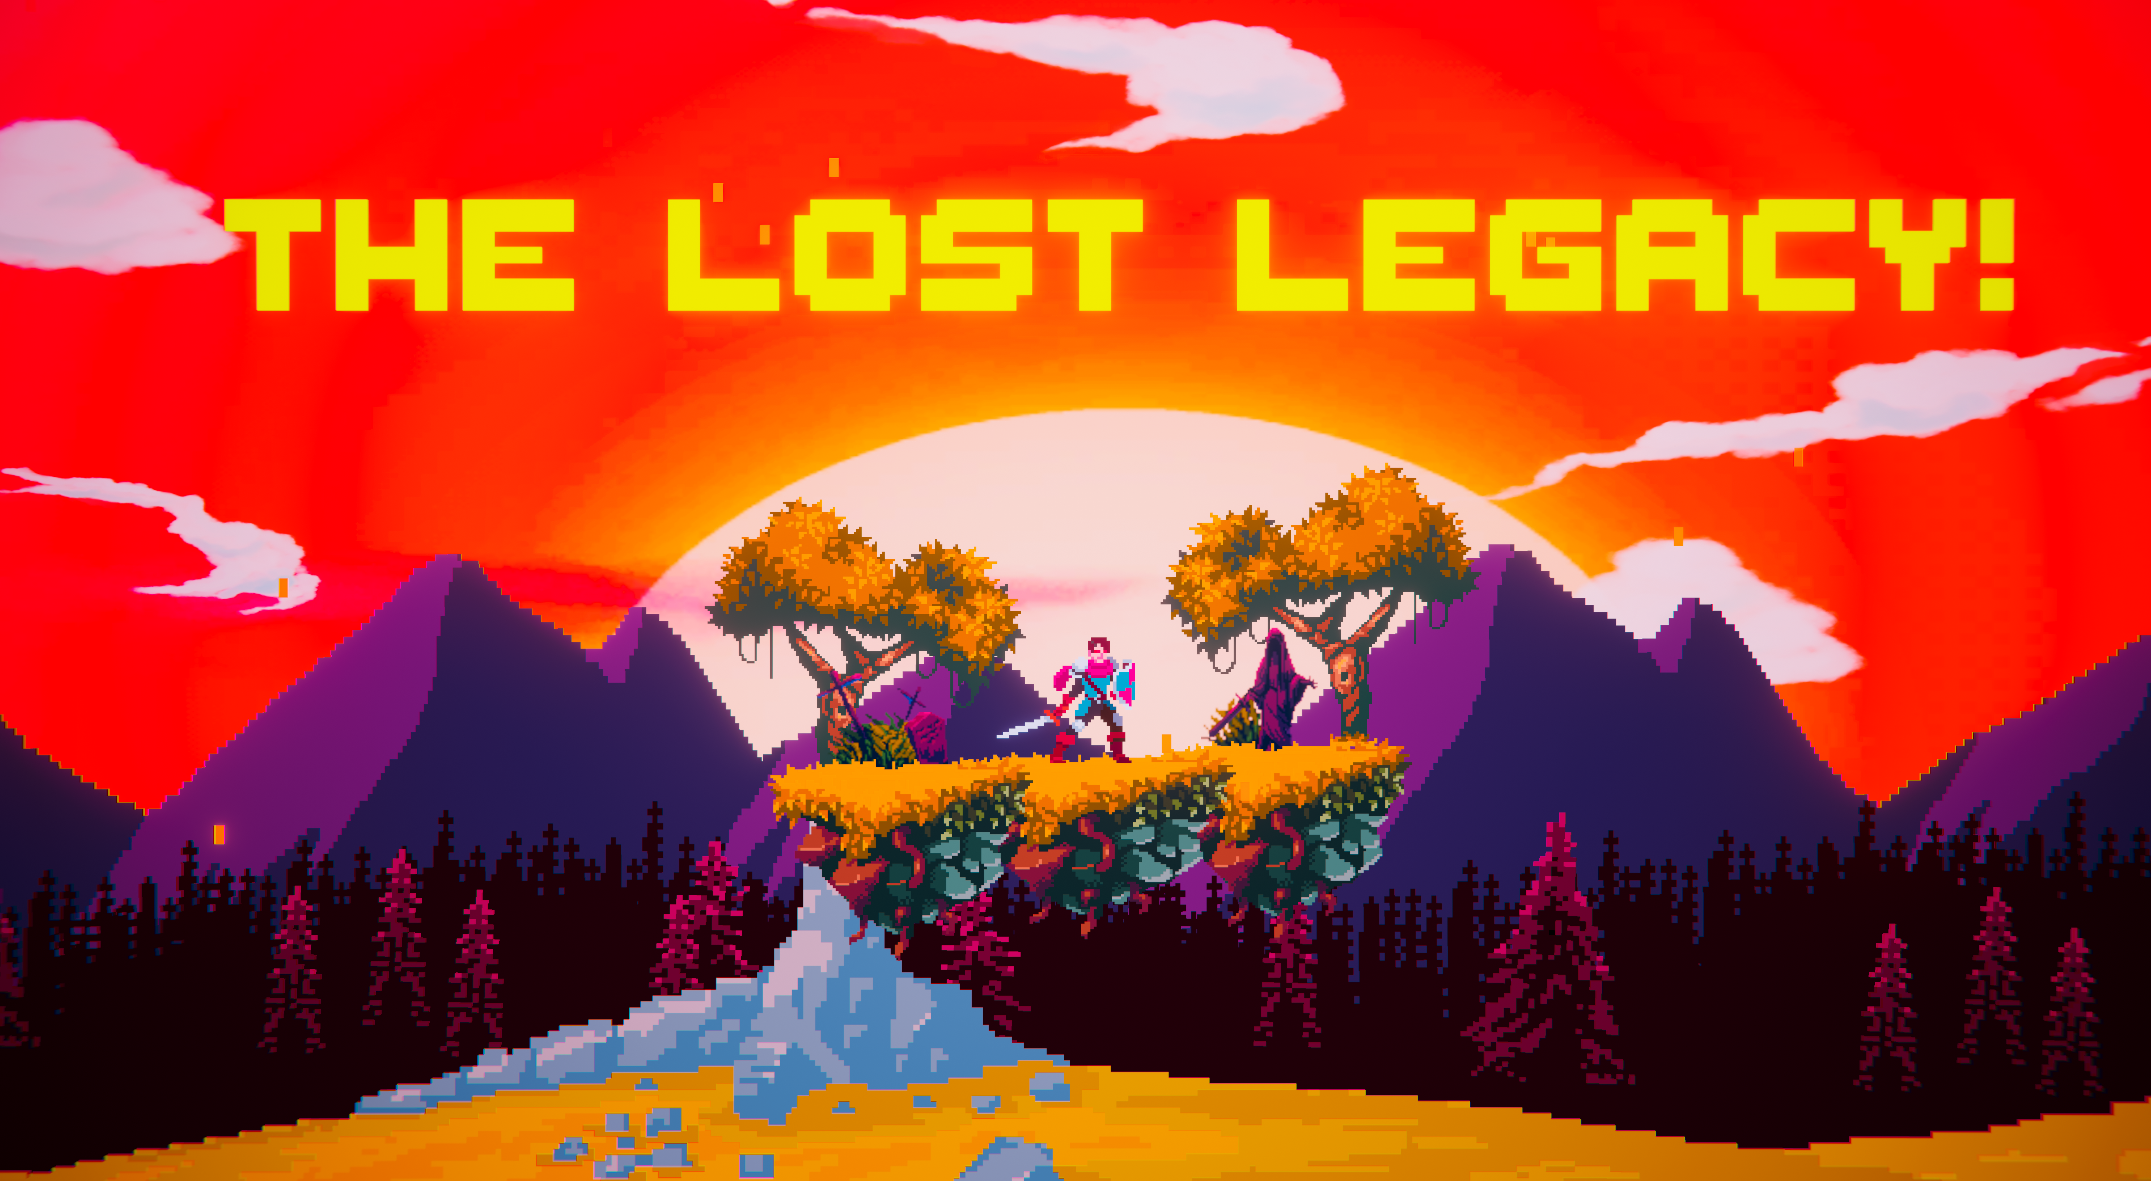 The Lost Legacy!